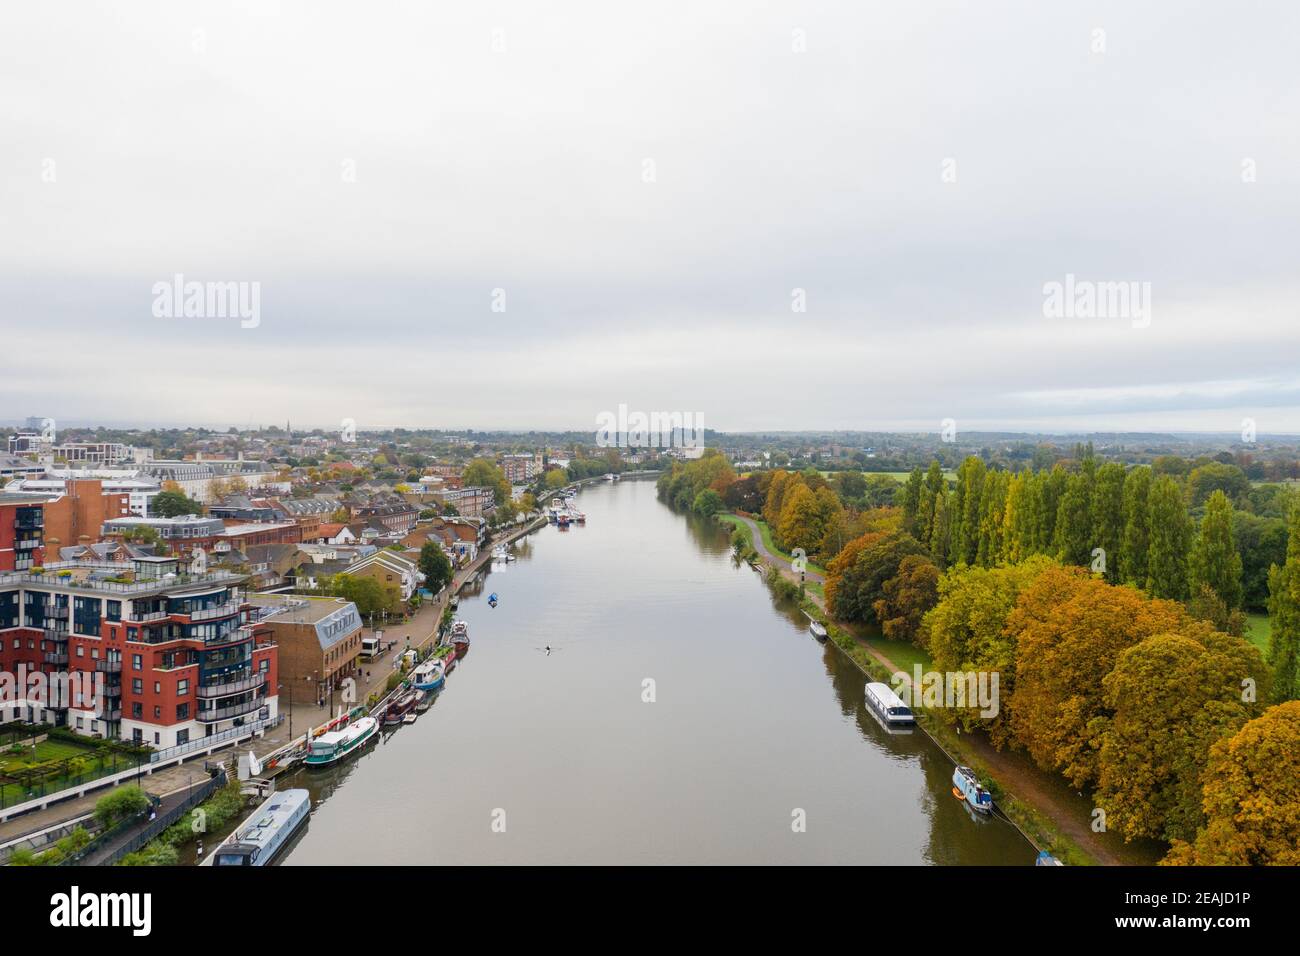 Aerial Landscape View Over a River in the Middle of a Town and a Forest Stock Photo